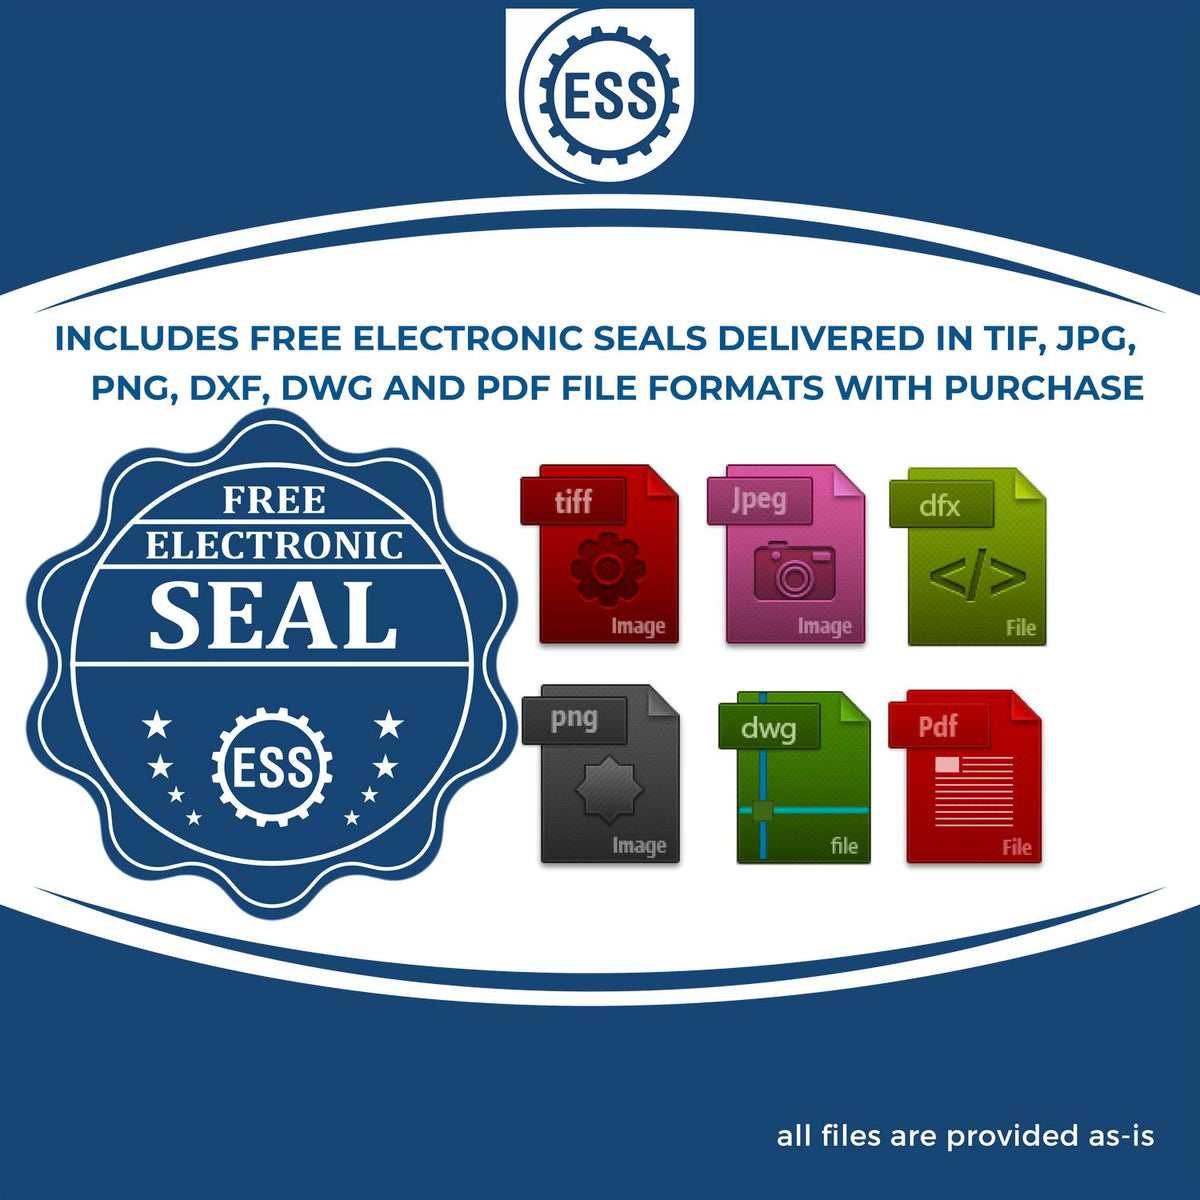 An infographic for the free electronic seal for the Soft Iowa Professional Engineer Seal illustrating the different file type icons such as DXF, DWG, TIF, JPG and PNG.